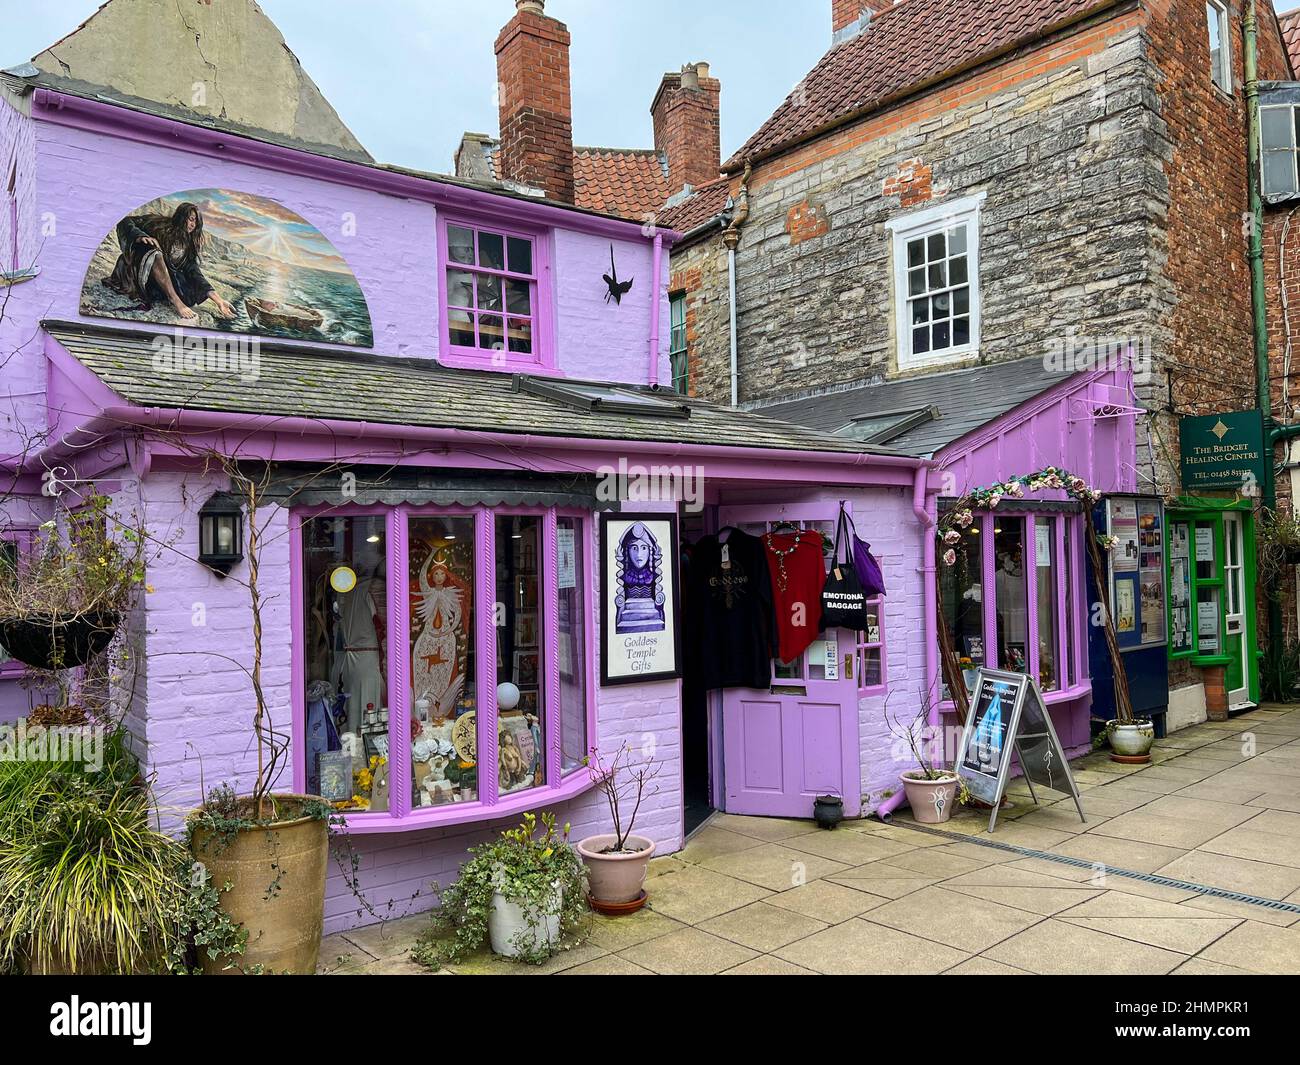 New age and spirituality shops and business premises in Glastonbury, Somerset, UK Stock Photo